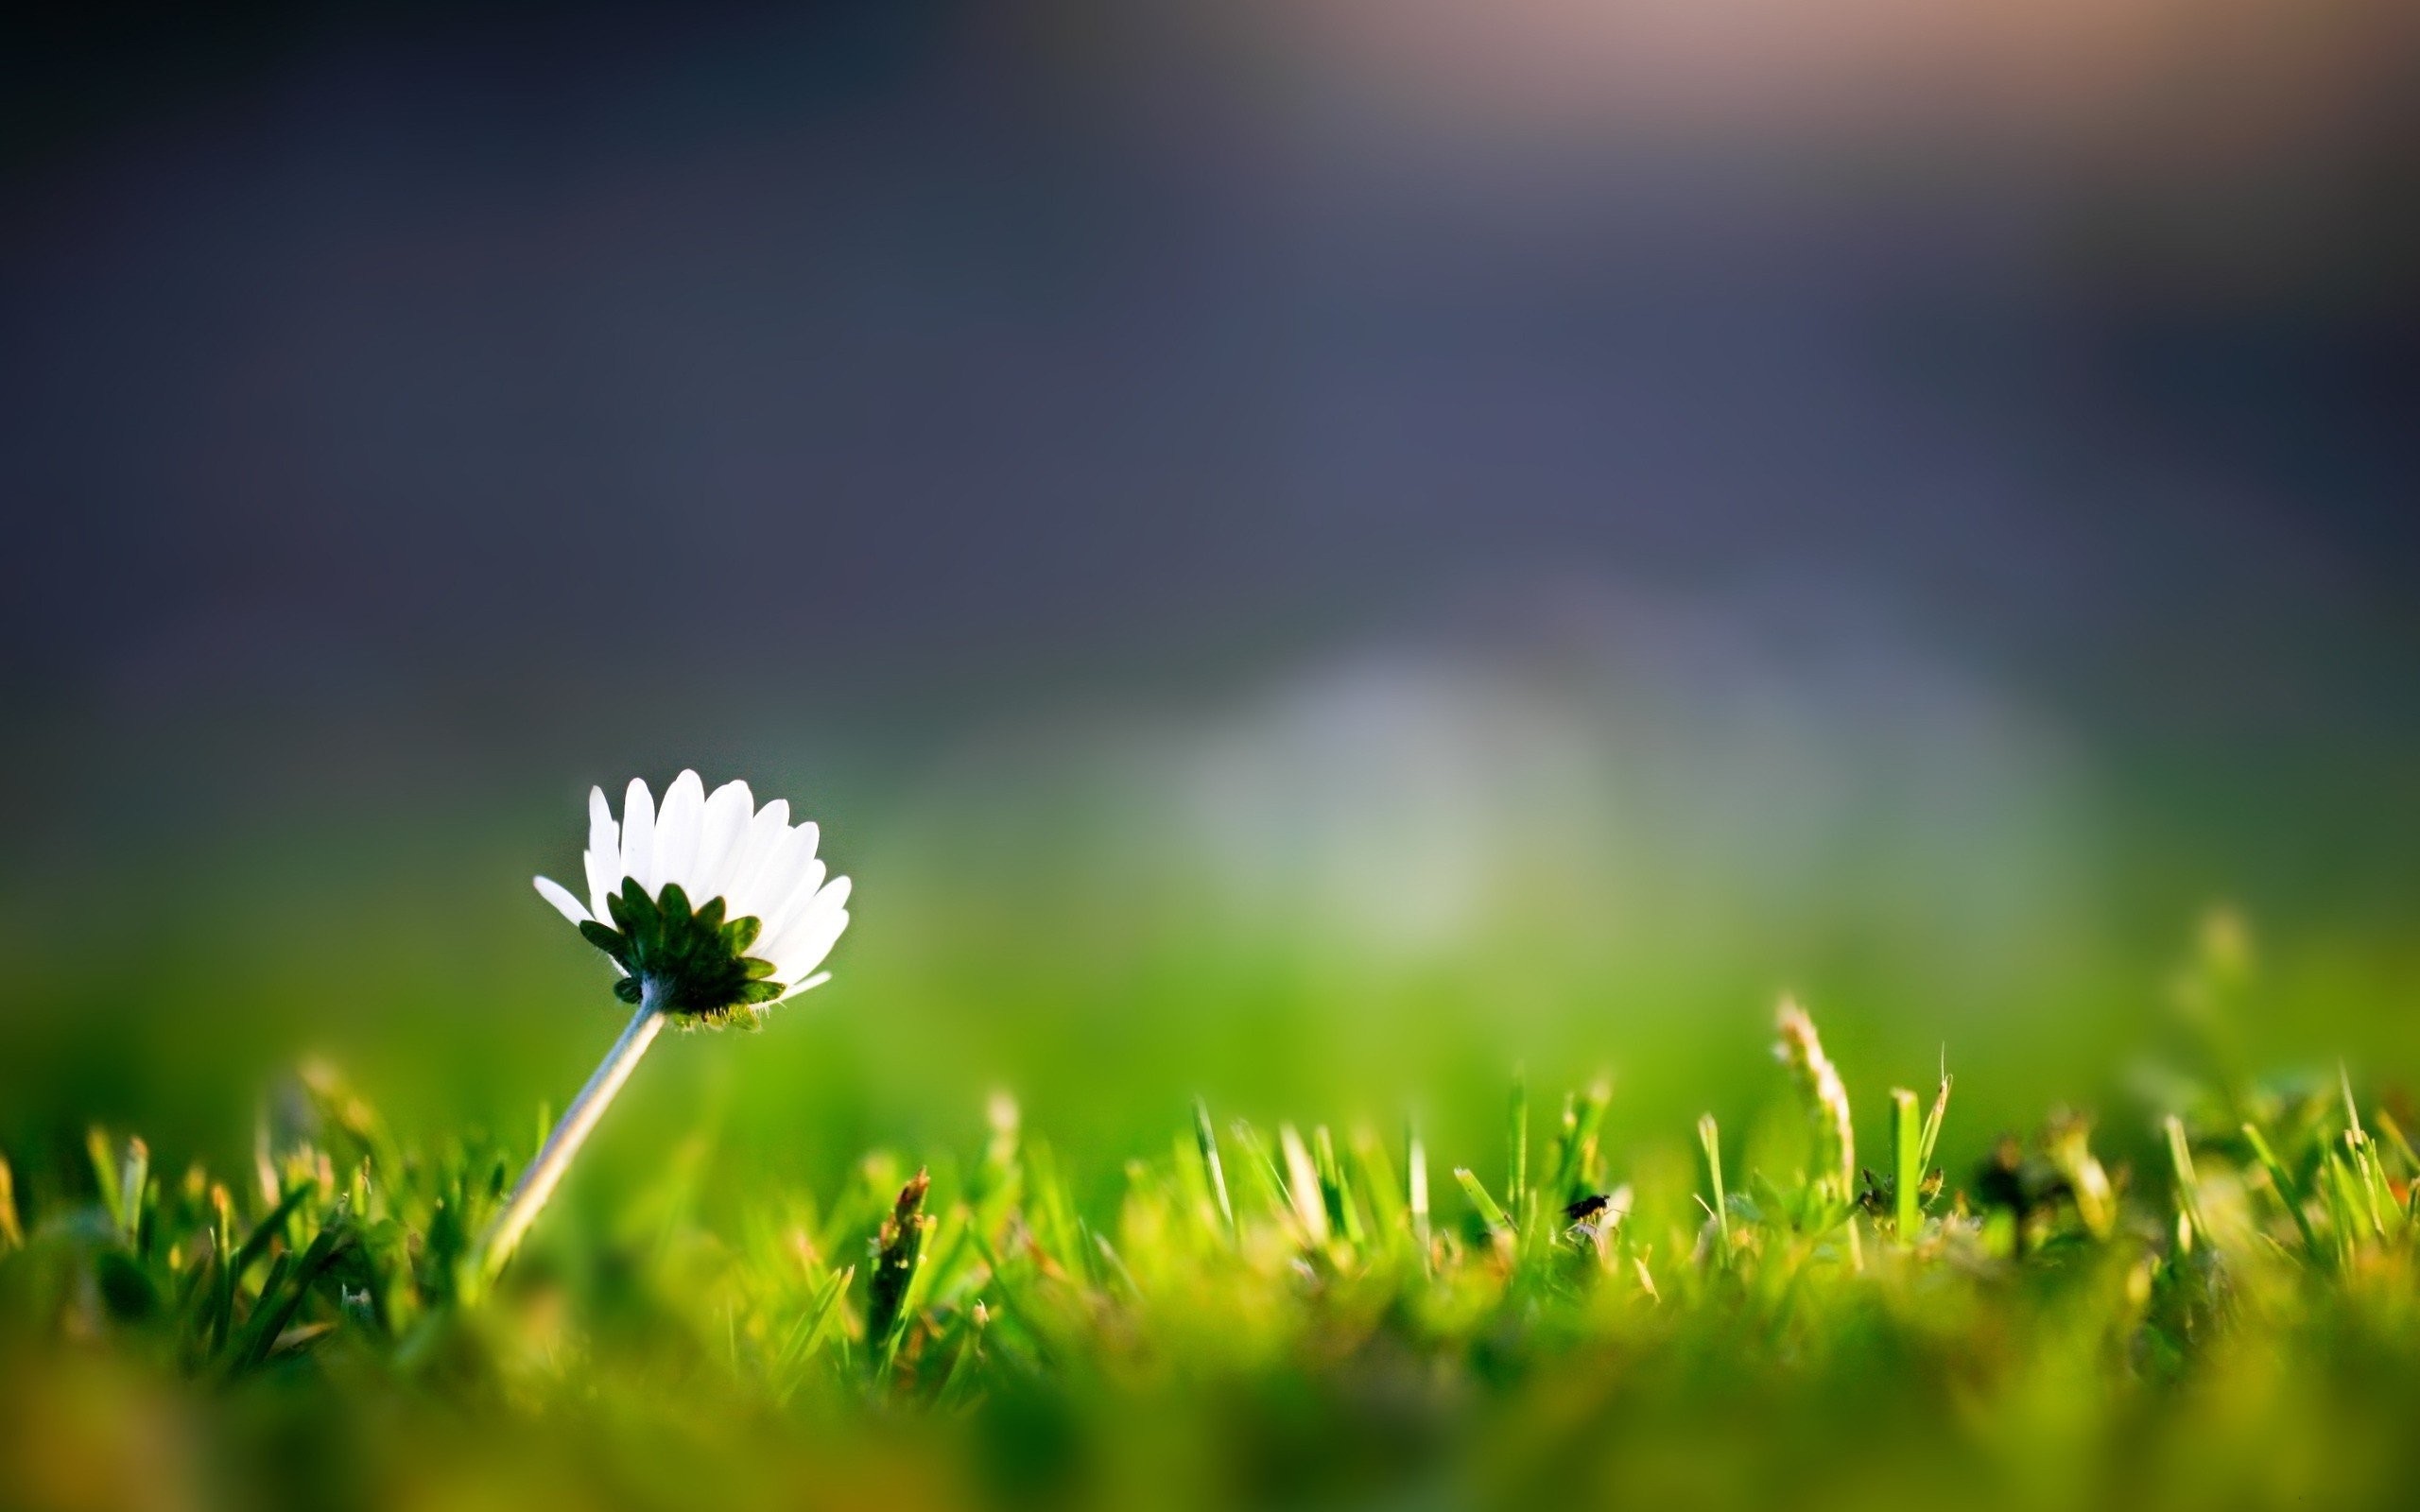 Res - 1920x1200, - Lone Flower In A Field , HD Wallpaper & Backgrounds